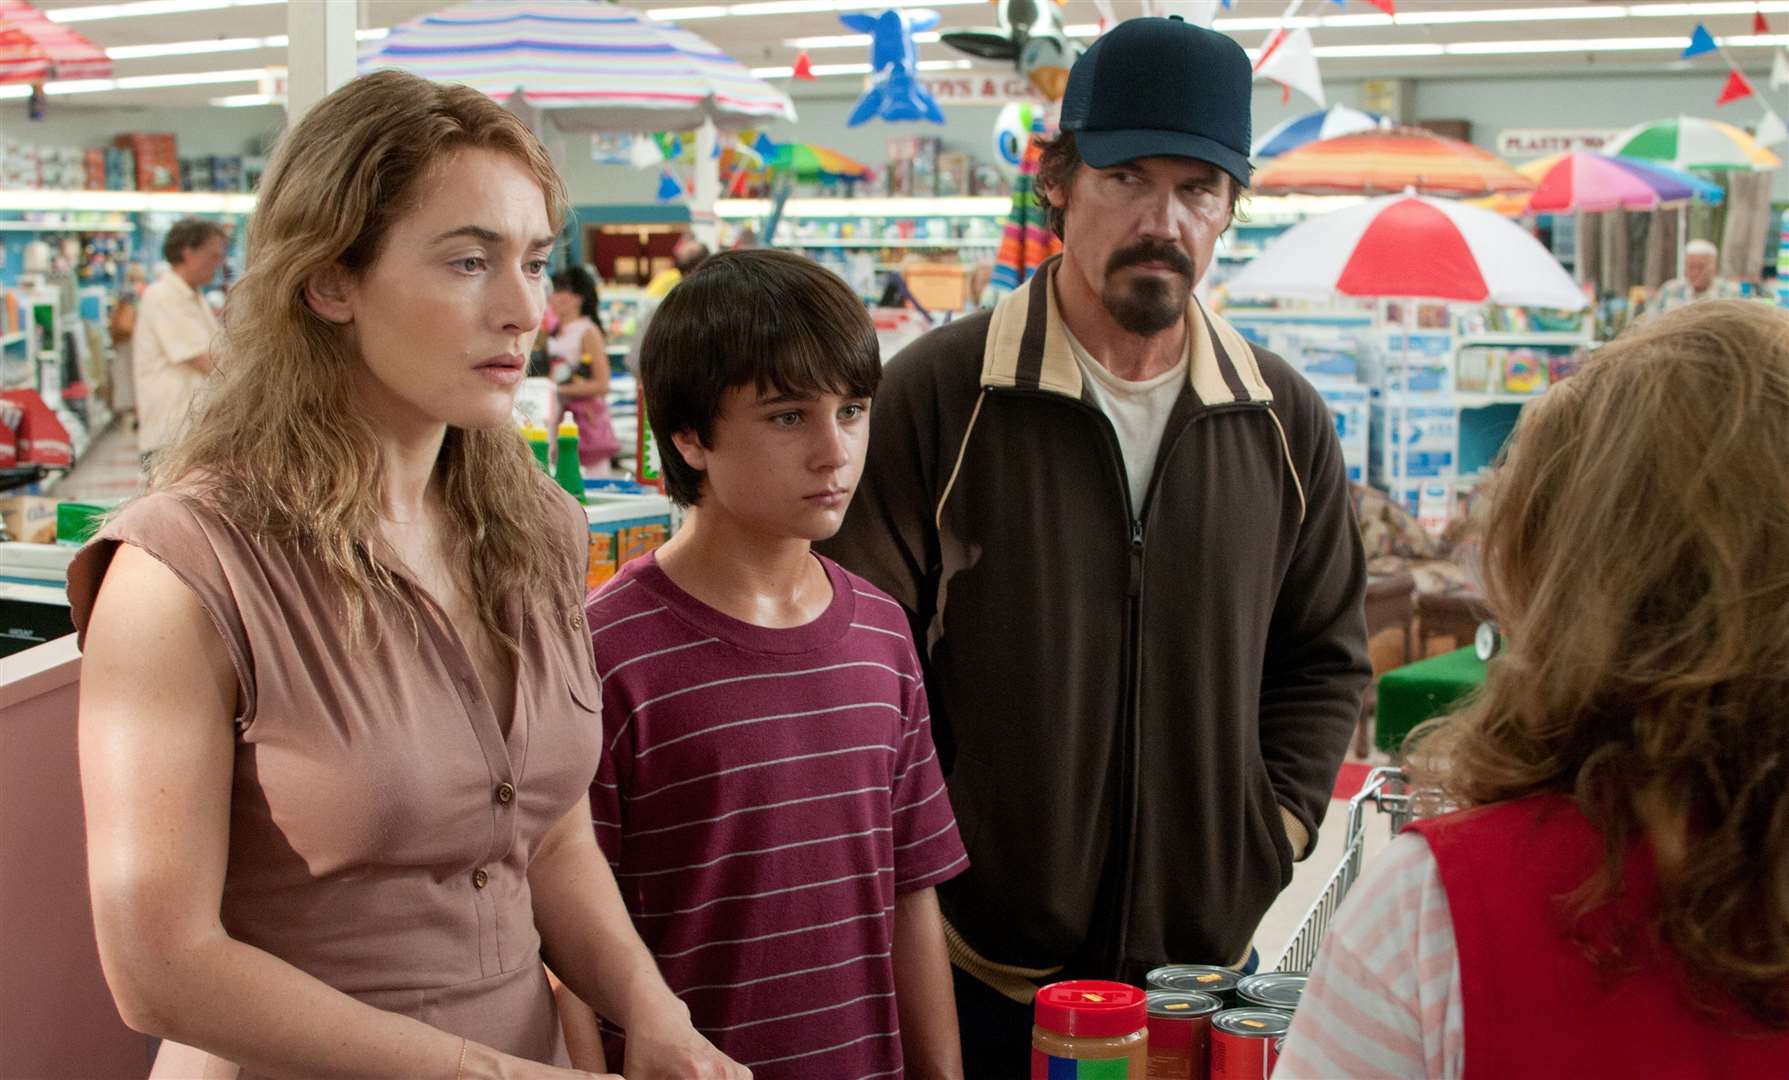 Labor Day, with Kate Winslet as Adele, Josh Brolin as Frank and Gattlin Griffith as Henry. Picture: PA Photo/Paramount